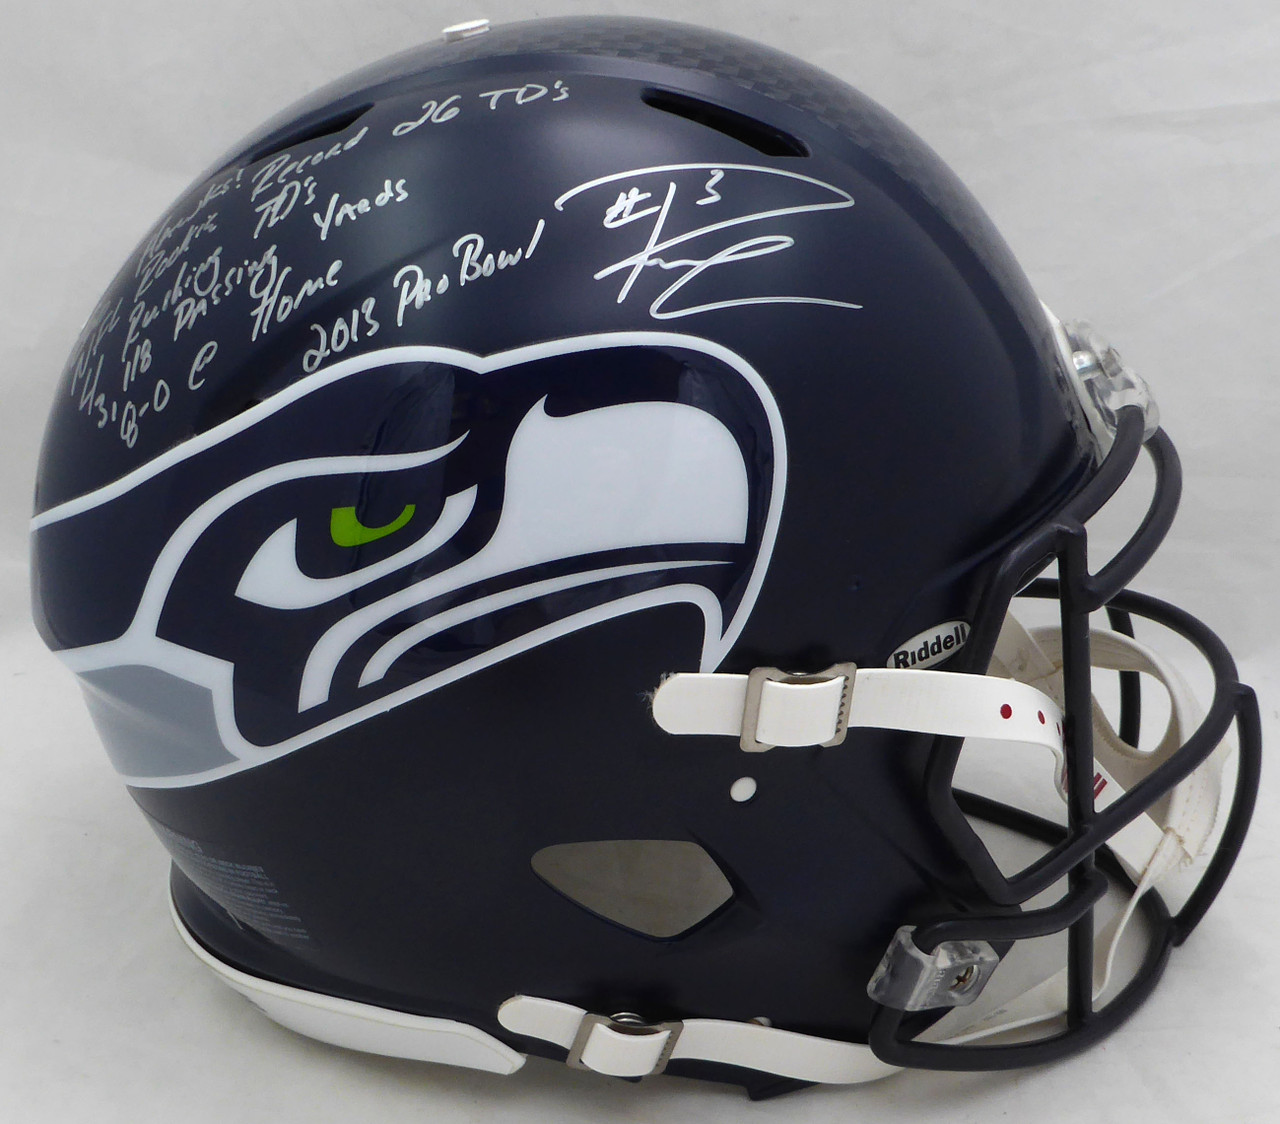 Russell Wilson Authentic Autographs Include Helmets, Photos, More